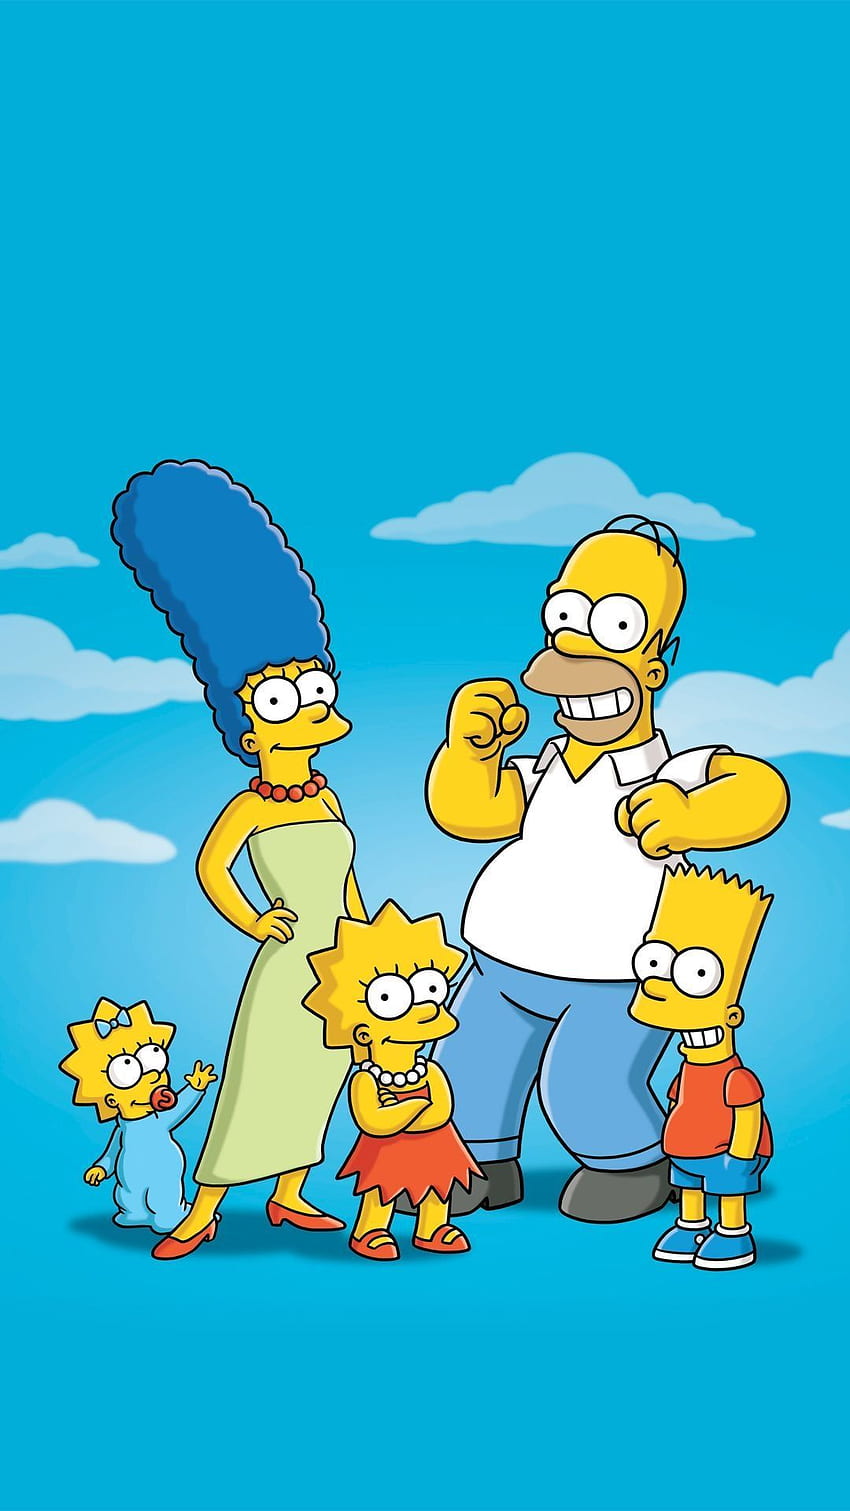 The Simpsons Family Funny For iPhone 6 Is Aに関して The Simpsons H in 2020. Simpson iphone, Simpsons drawing, Cartoon HD電話の壁紙